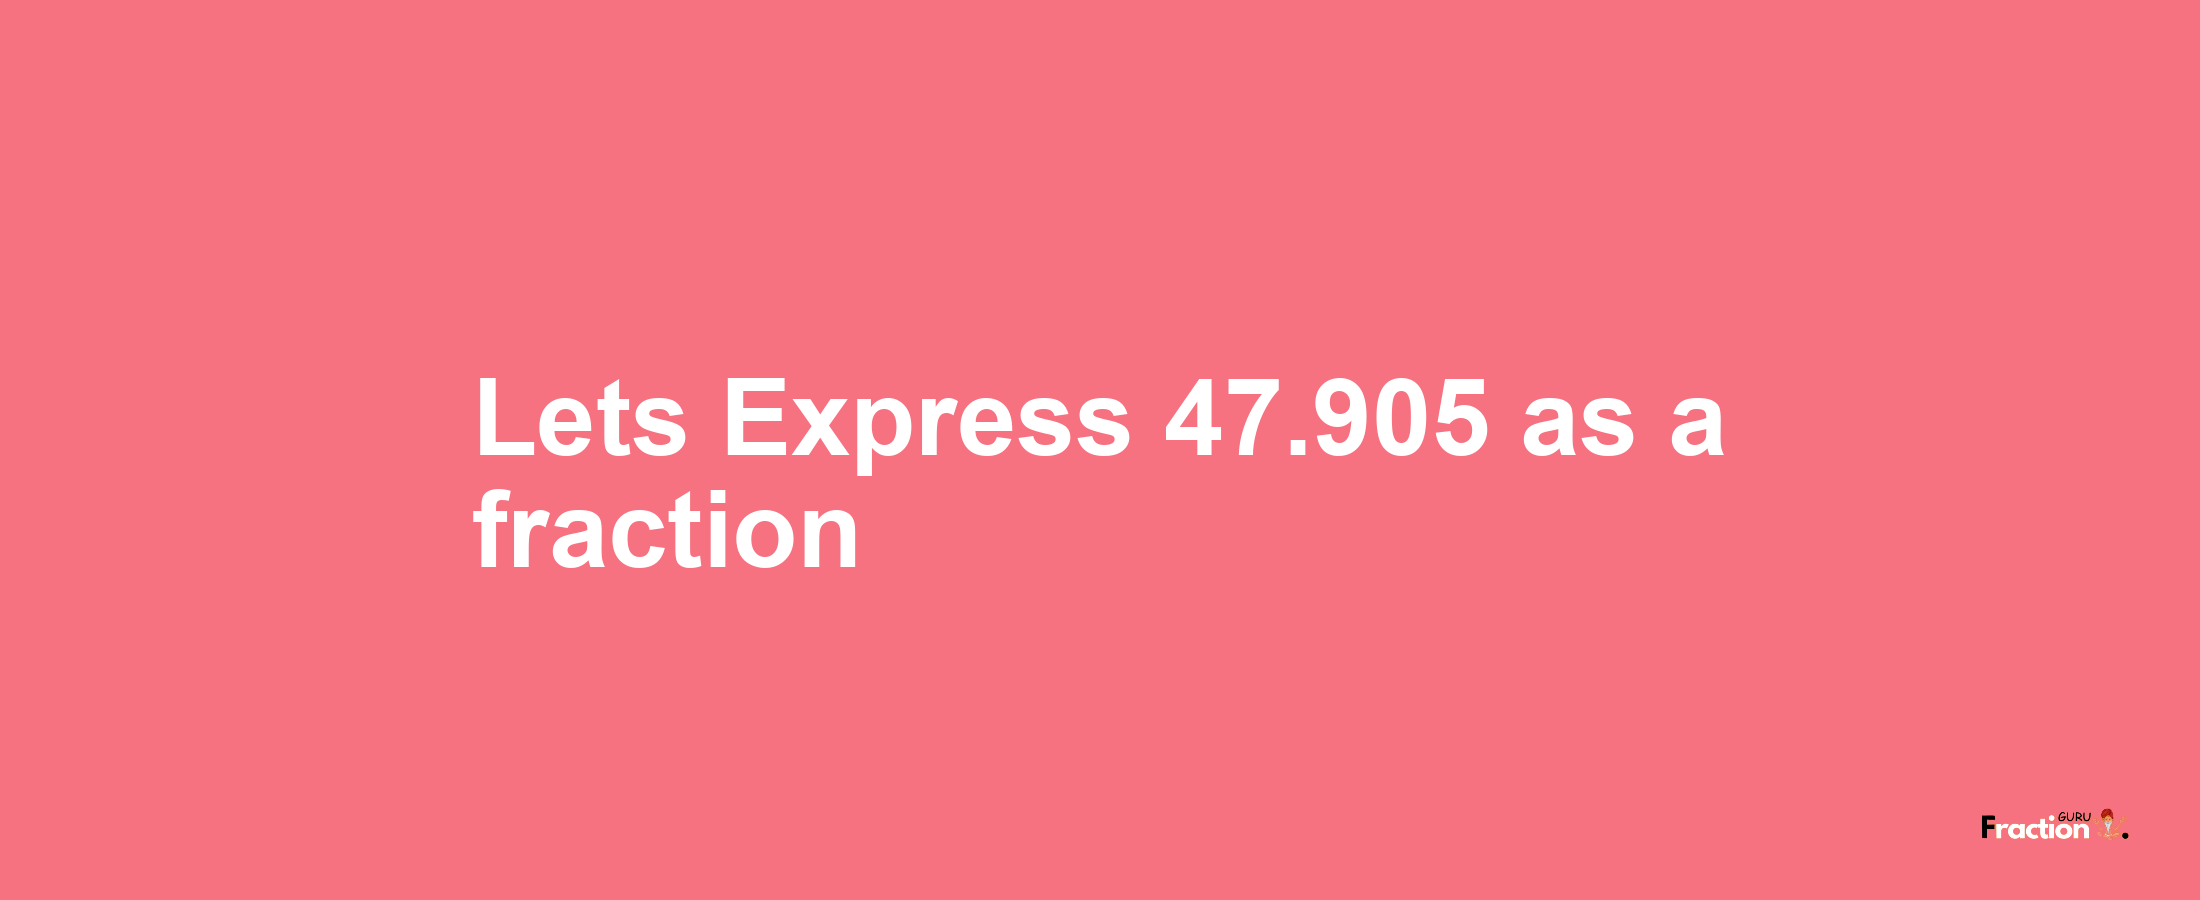 Lets Express 47.905 as afraction